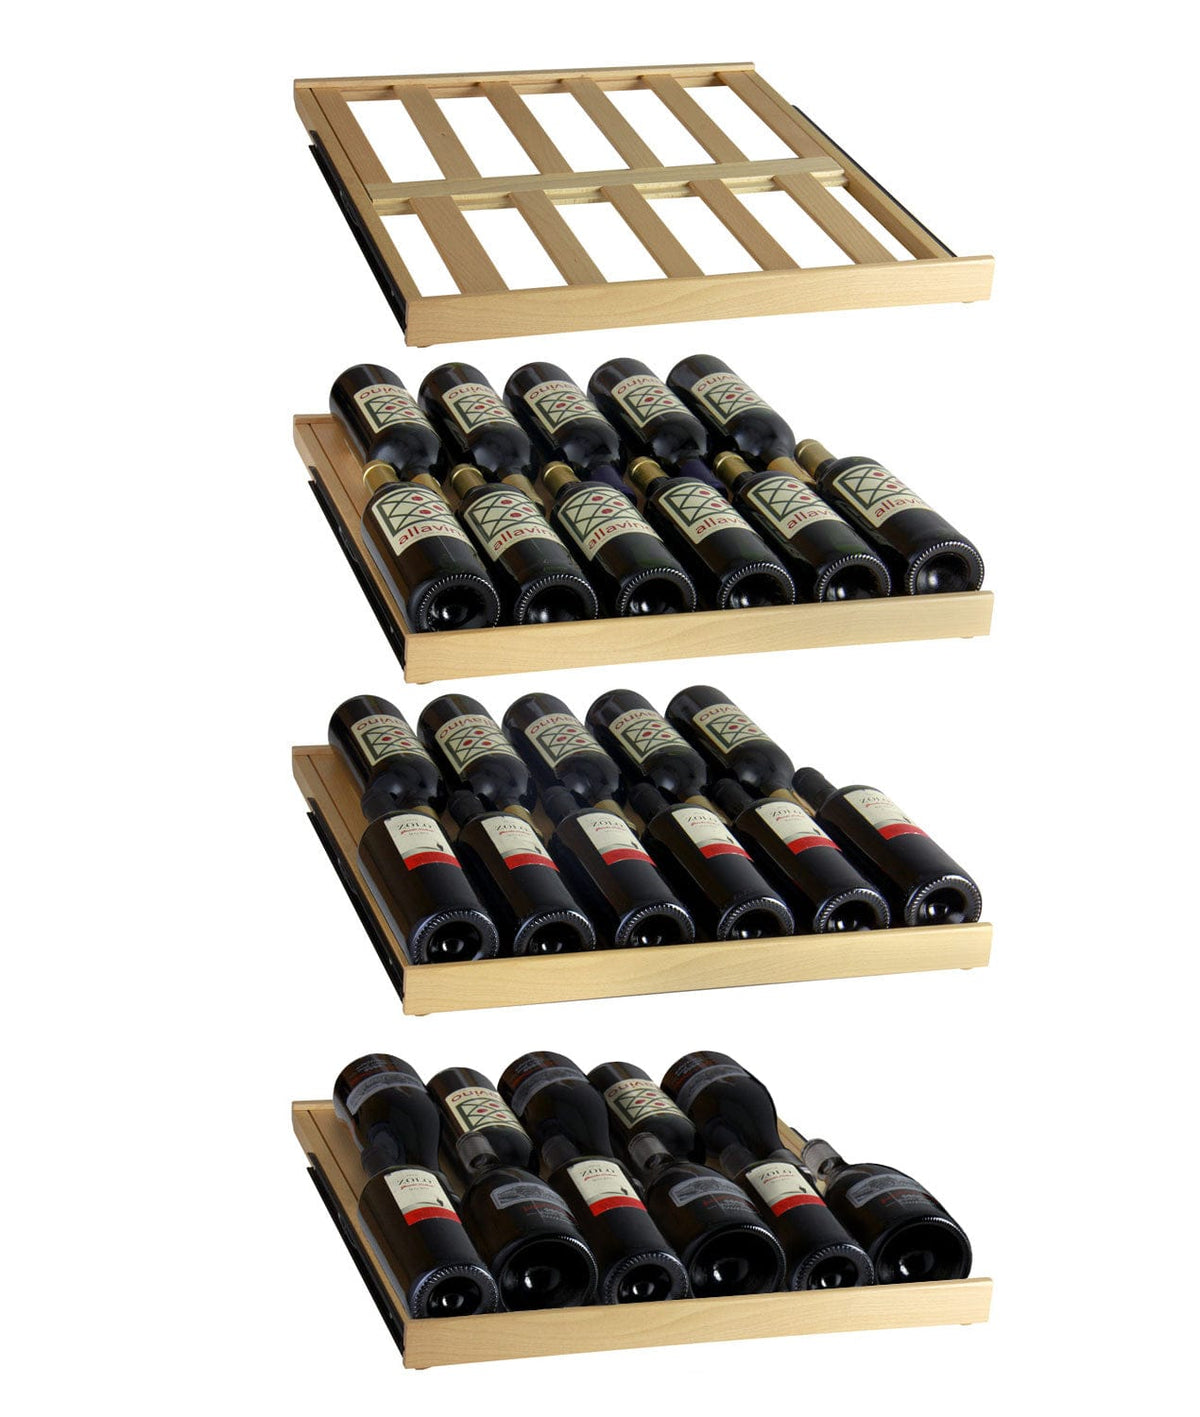 Allavino Flexcount Classic II 172 Bottle Dual Zone 24 Inch Wide Wine Cooler shelves with bottles of wine.